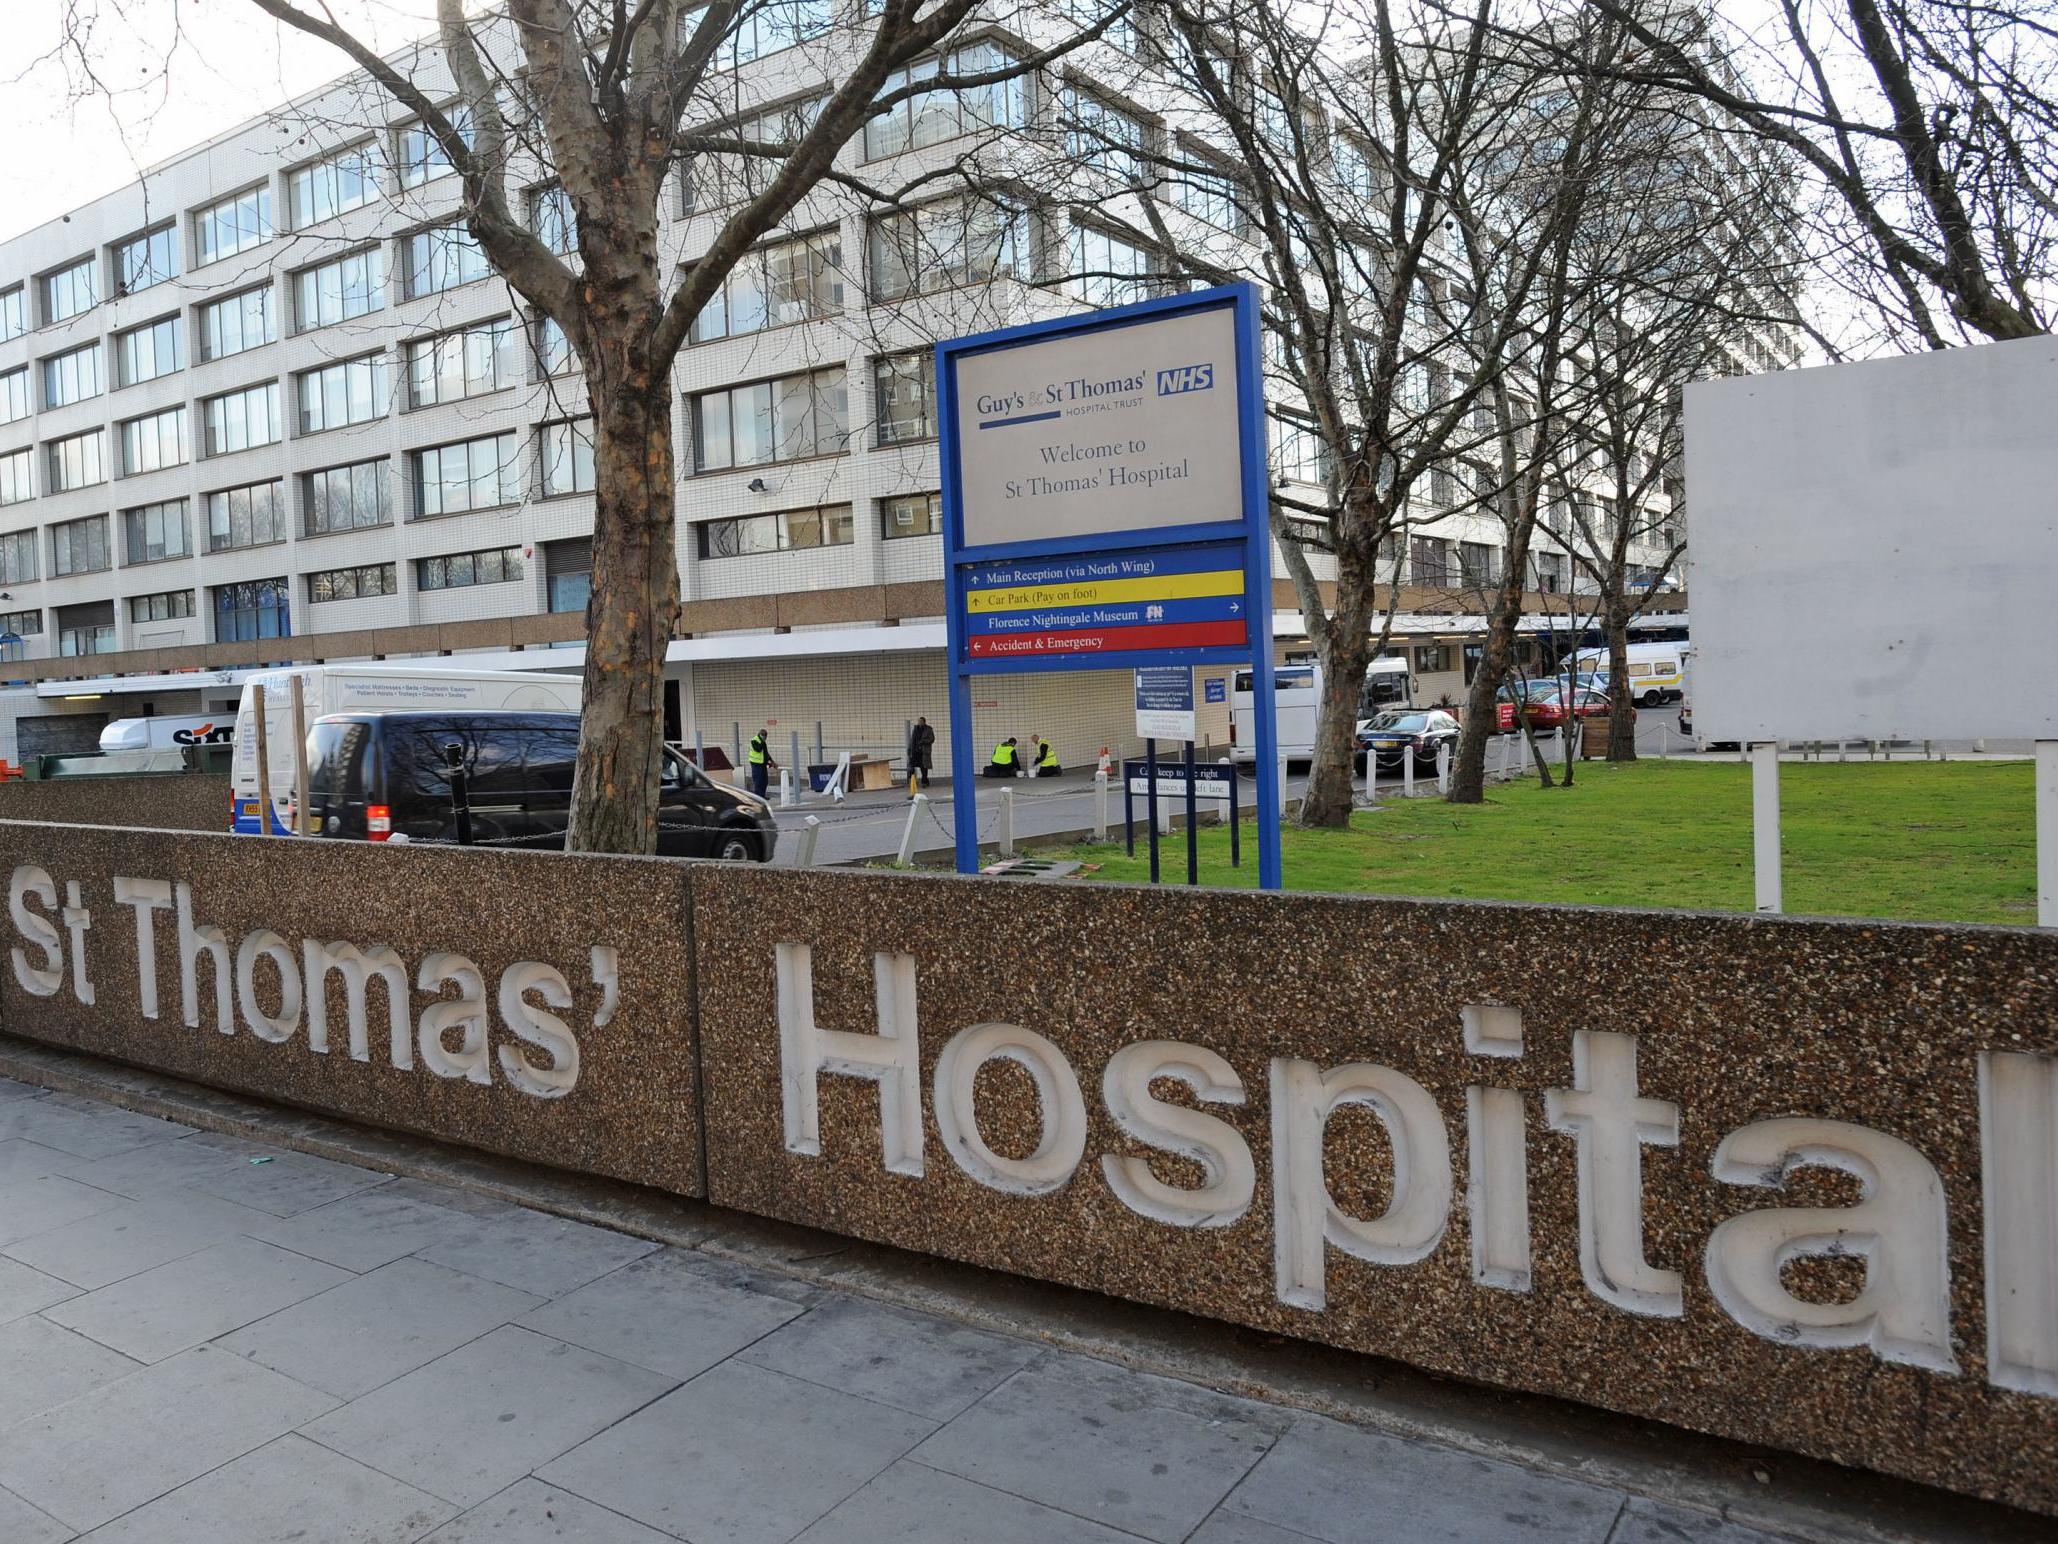 Nine-day-old Yousef Al-Kharboush died after receiving contaminated feed at St Thomas’ Hospital in London